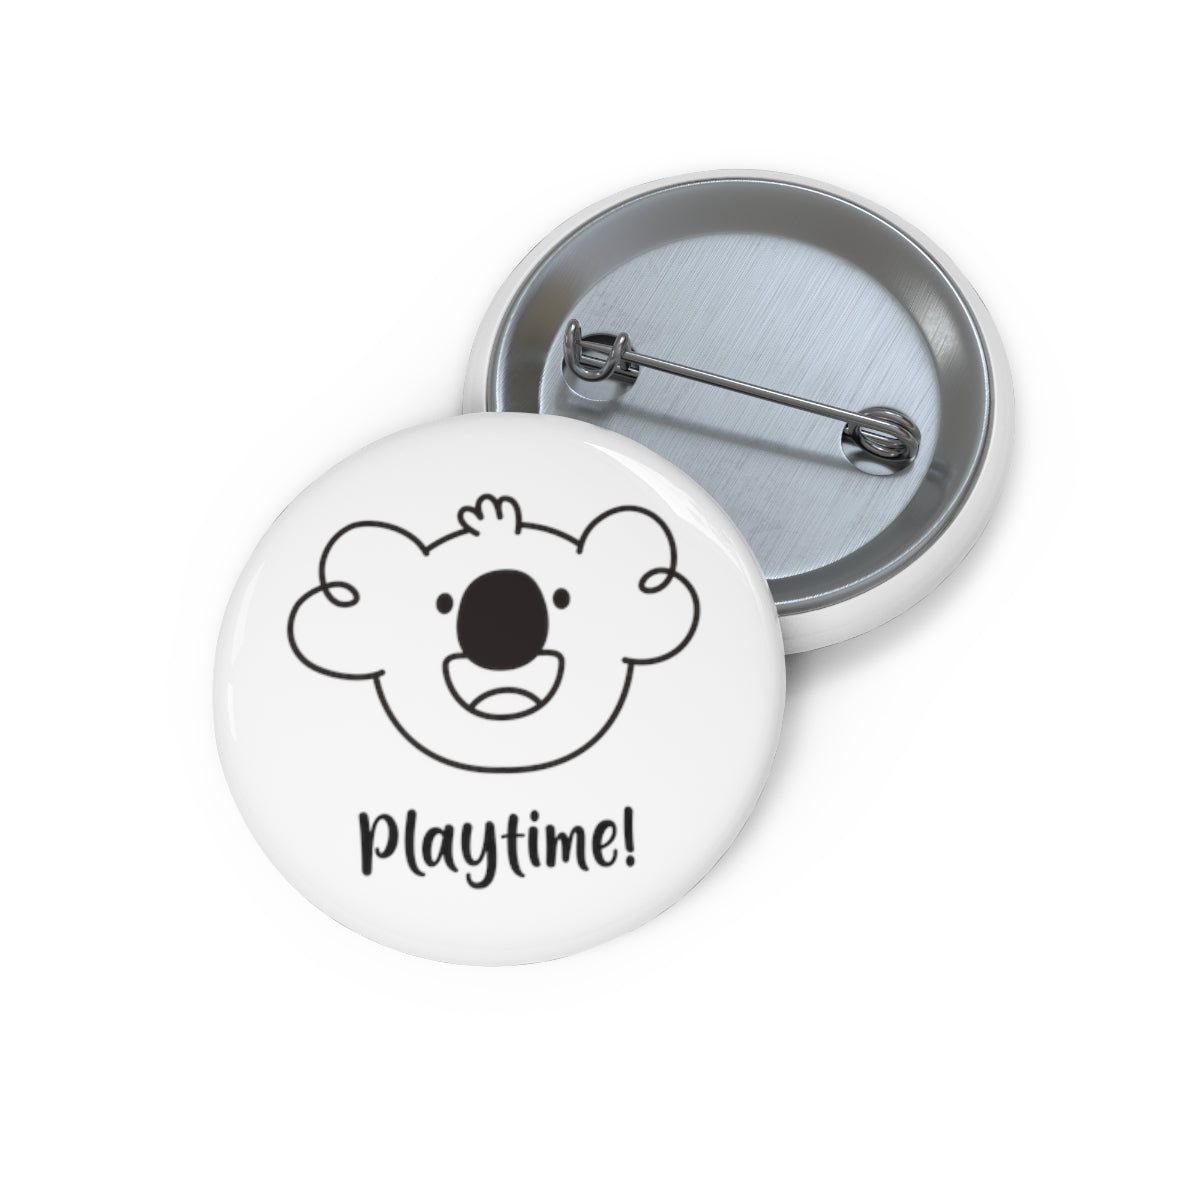 Tyler's Playtime! Pin Buttons